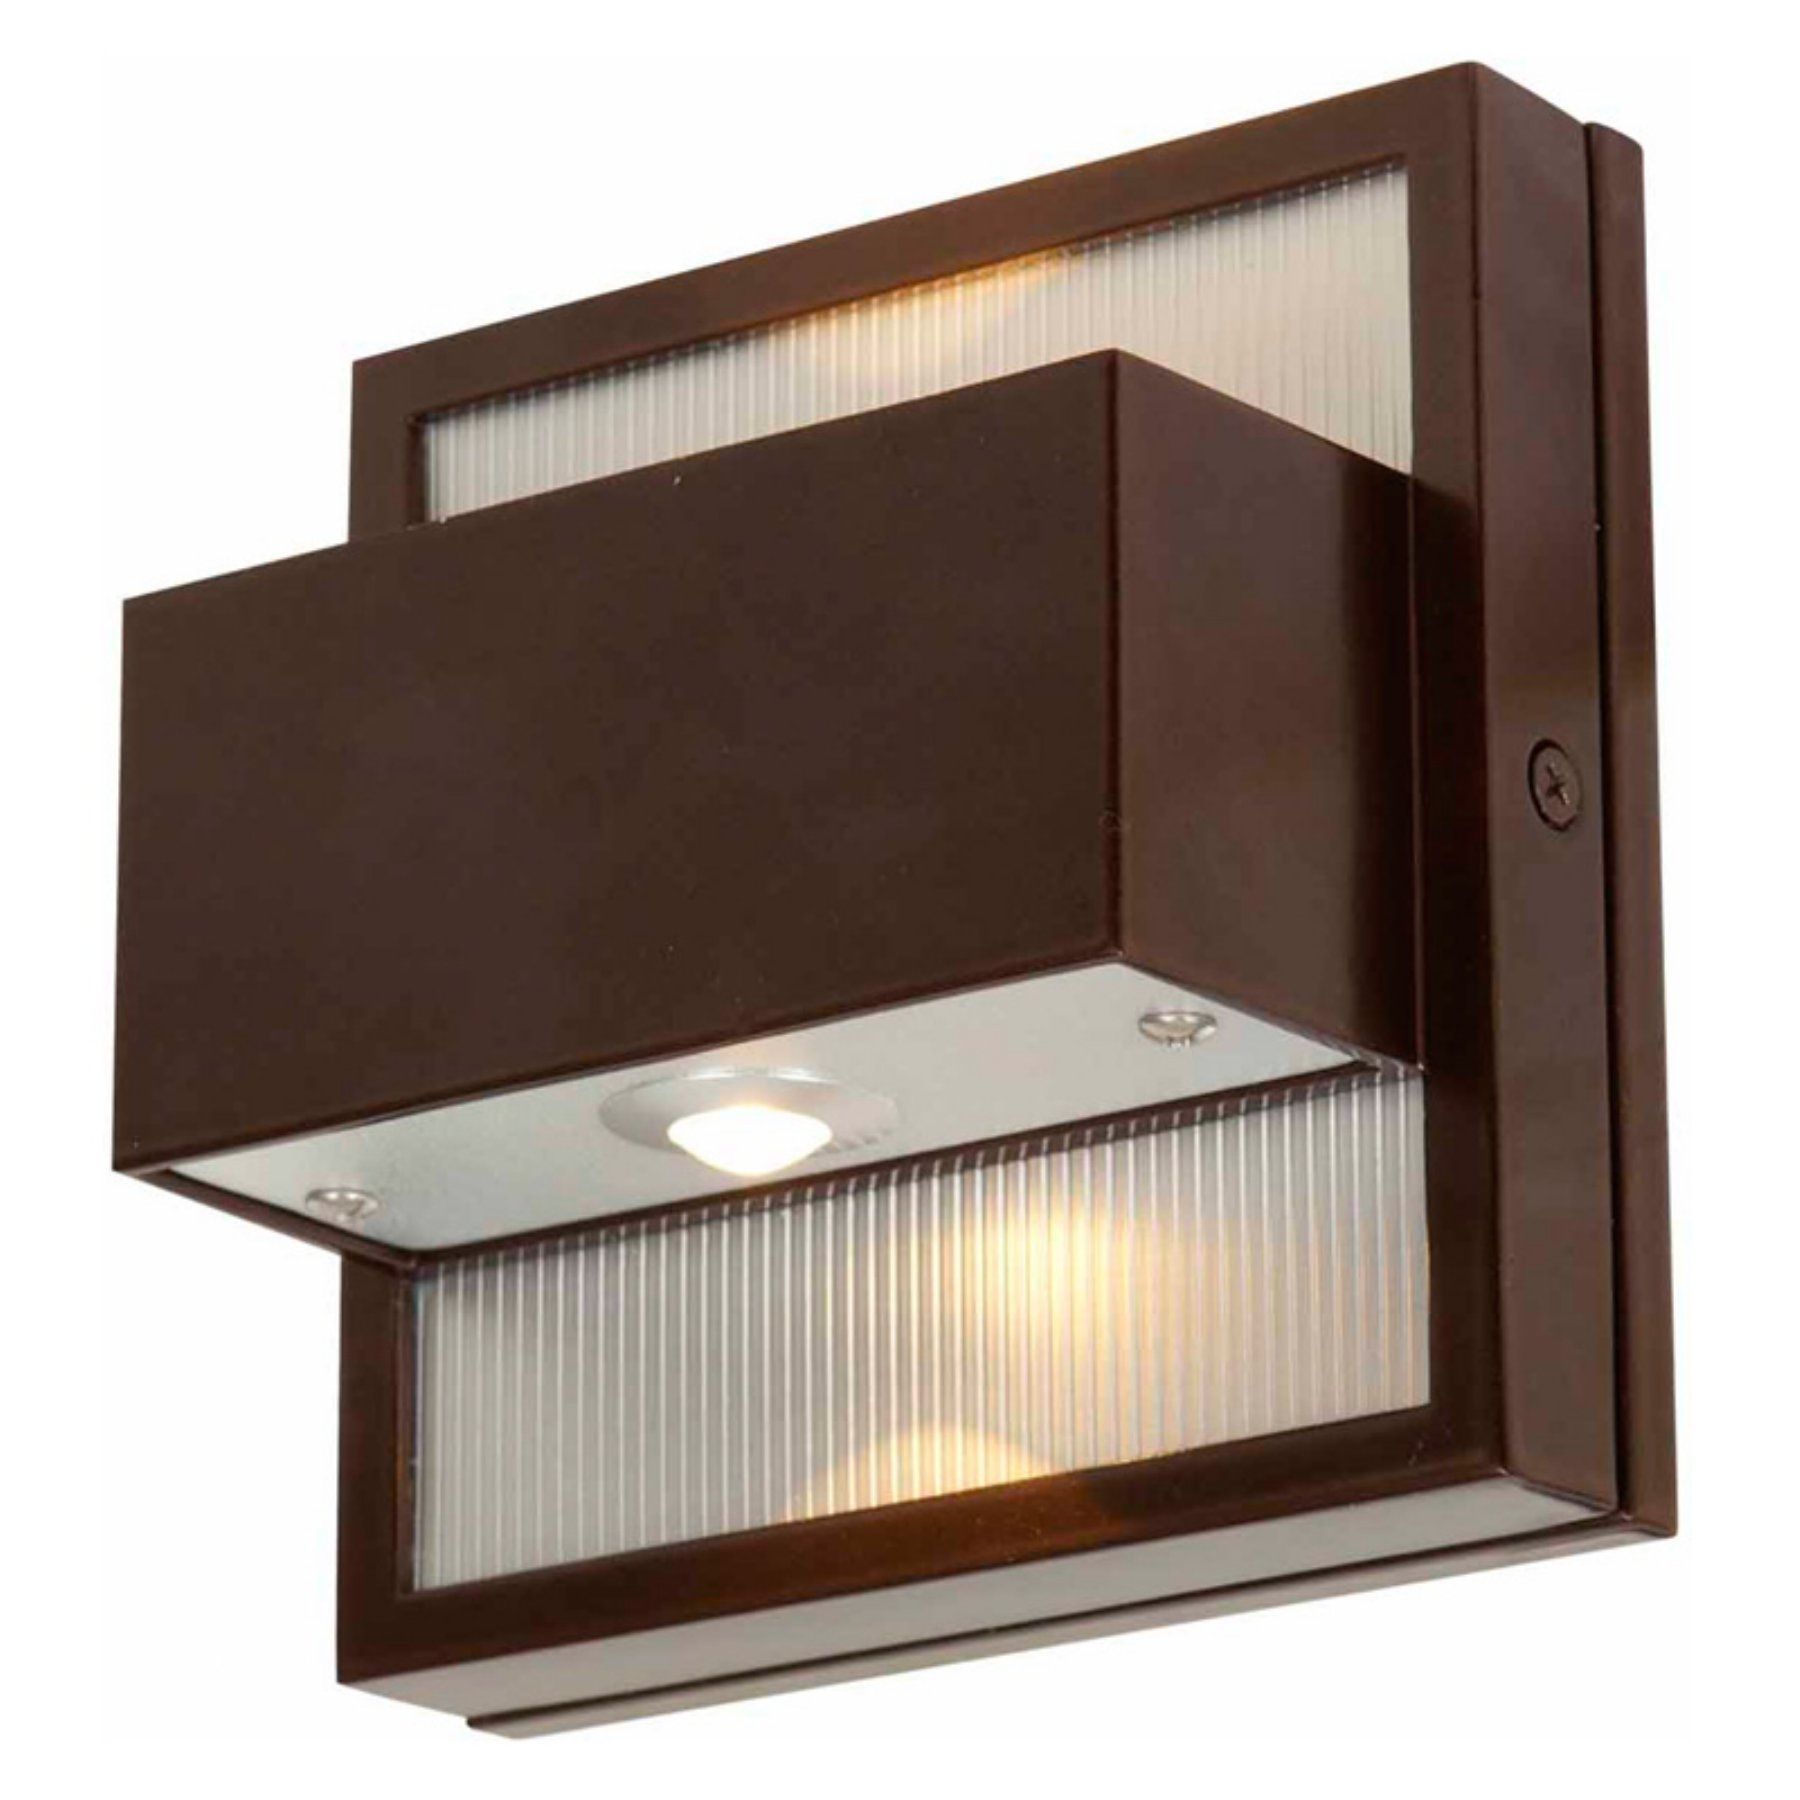 Access Lighting Zyzx 23064ledmg Wall Light – 5.25h In. – 23064ledmg Inside Access Lighting Outdoor Wall Sconces (Photo 4 of 15)